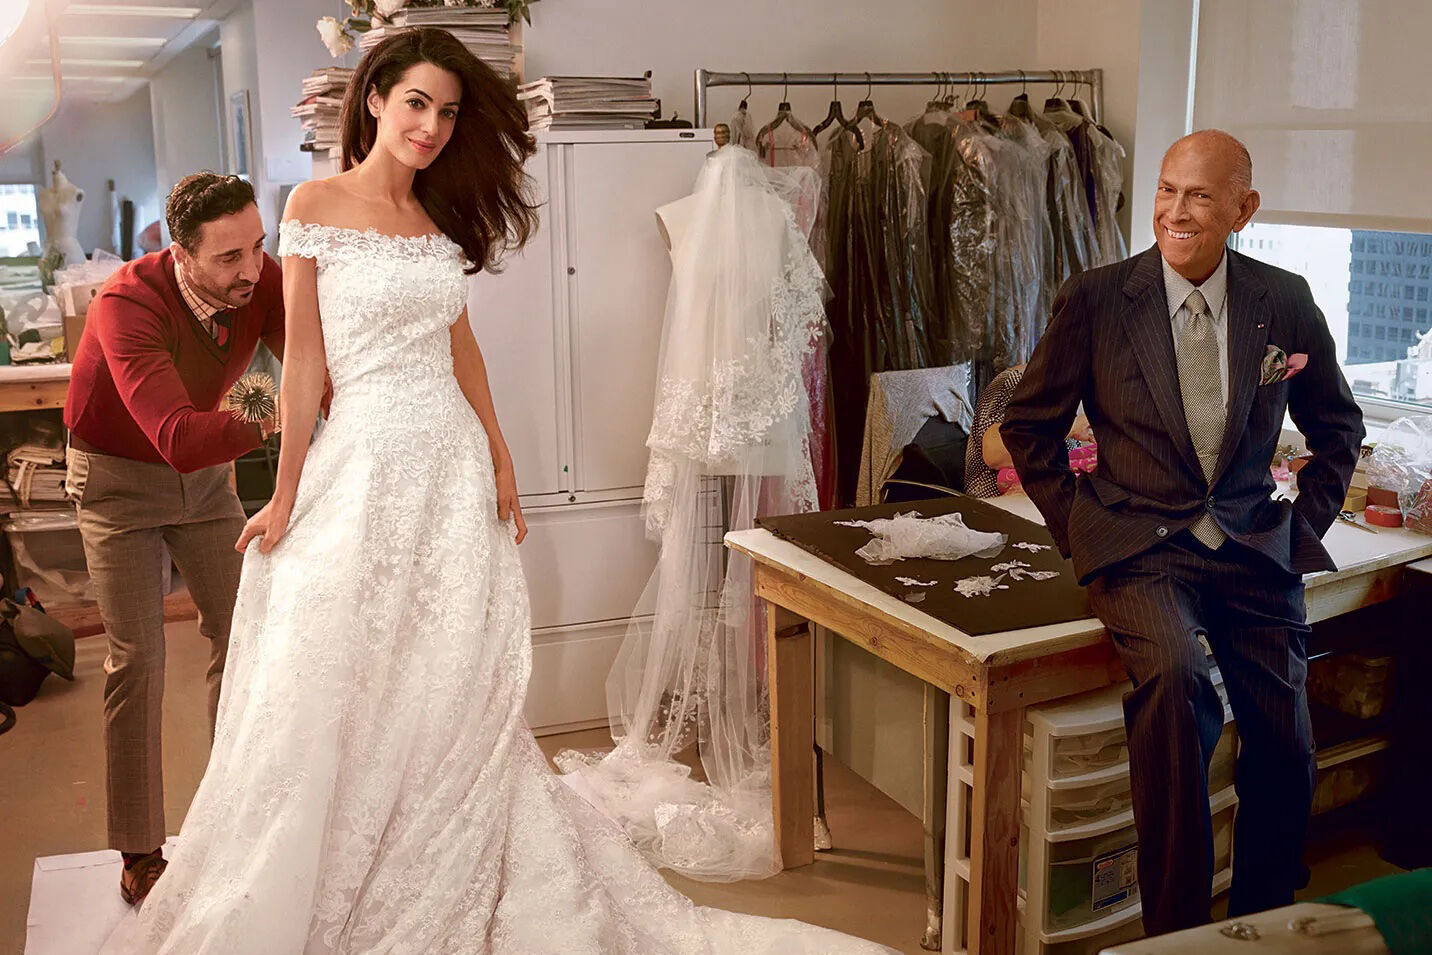 Most Influential Women in History Weddings: Amal Clooney at her wedding dress fitting with Oscar de la Renta